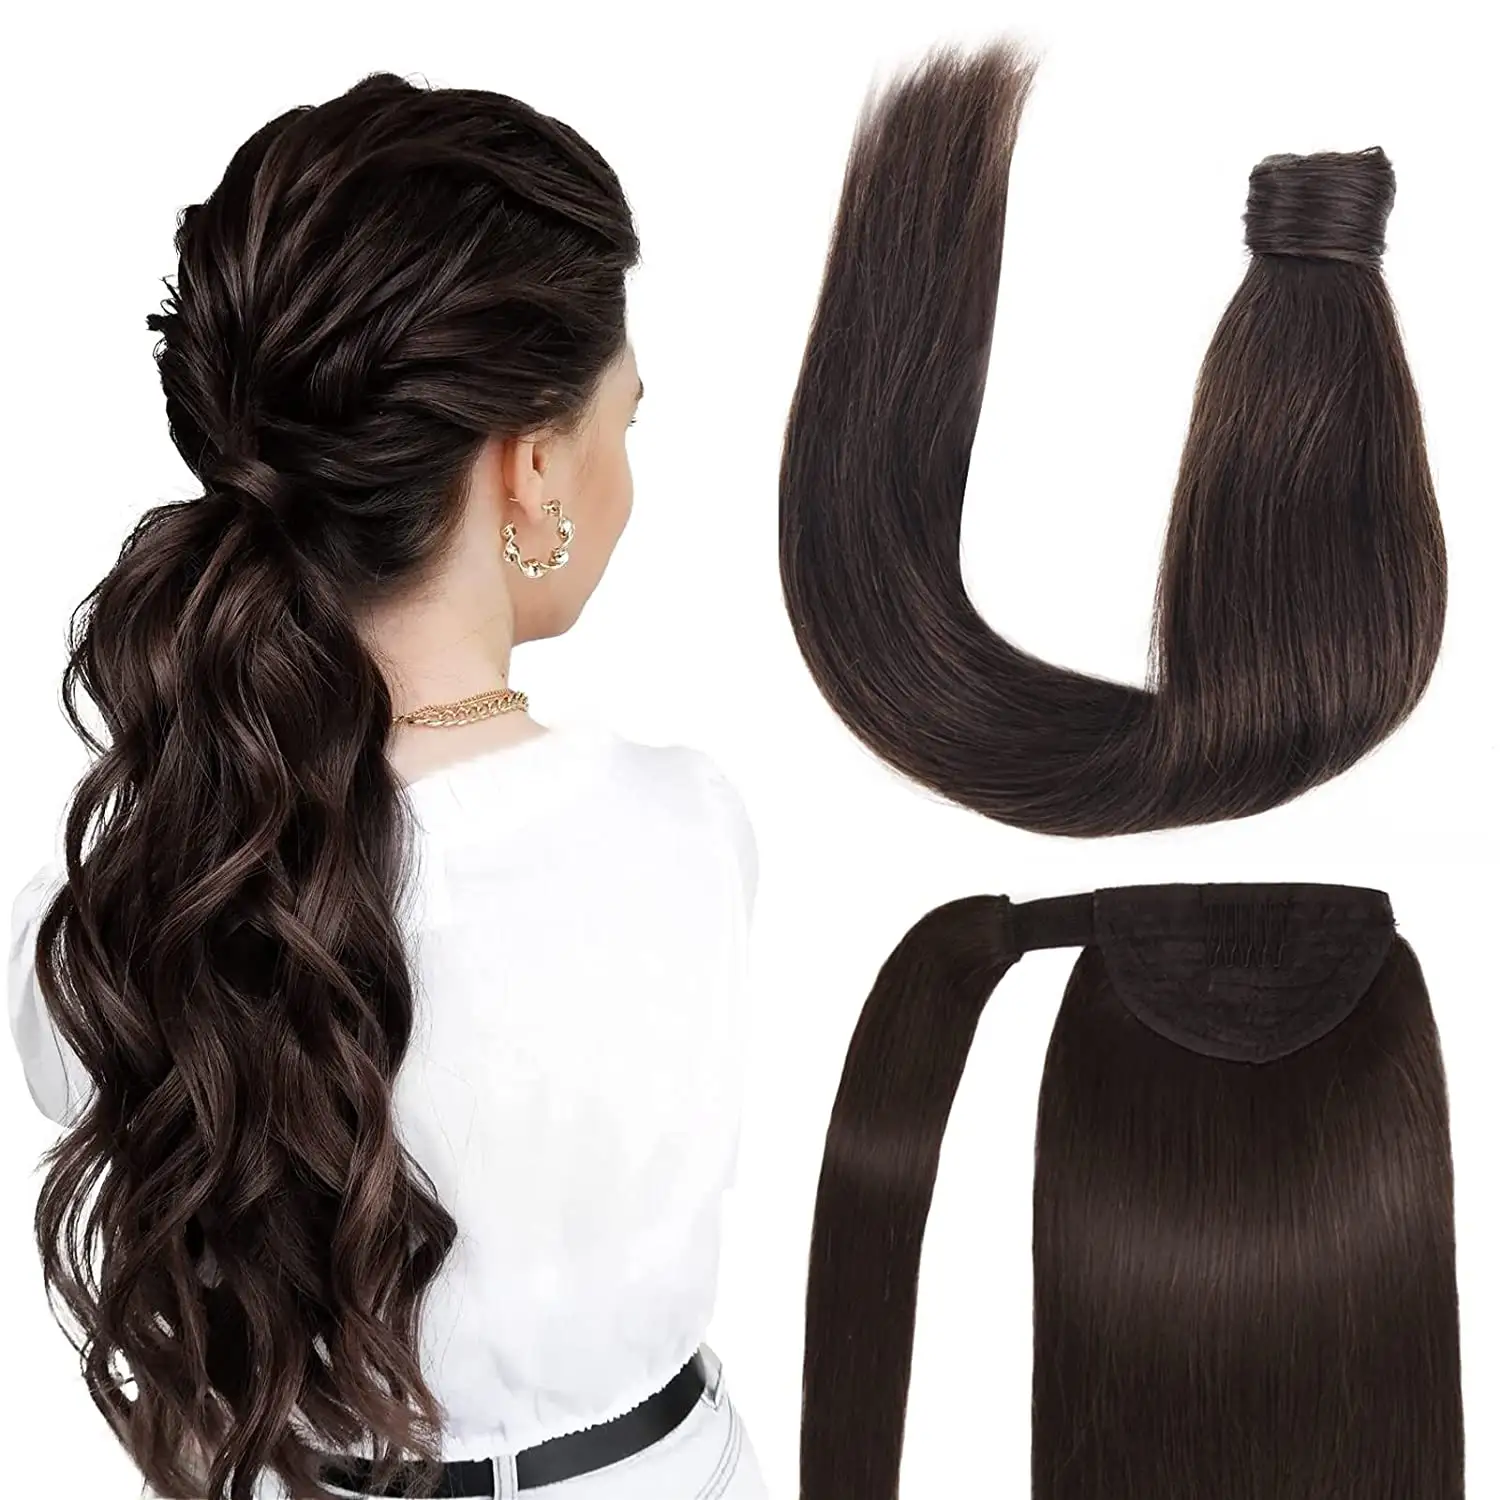 Pony Tails Extensions Human Hair,Clip in Wrap Around Real Human Hair Ponytail Extensions,Long Straight Hair Extensions Ponytail